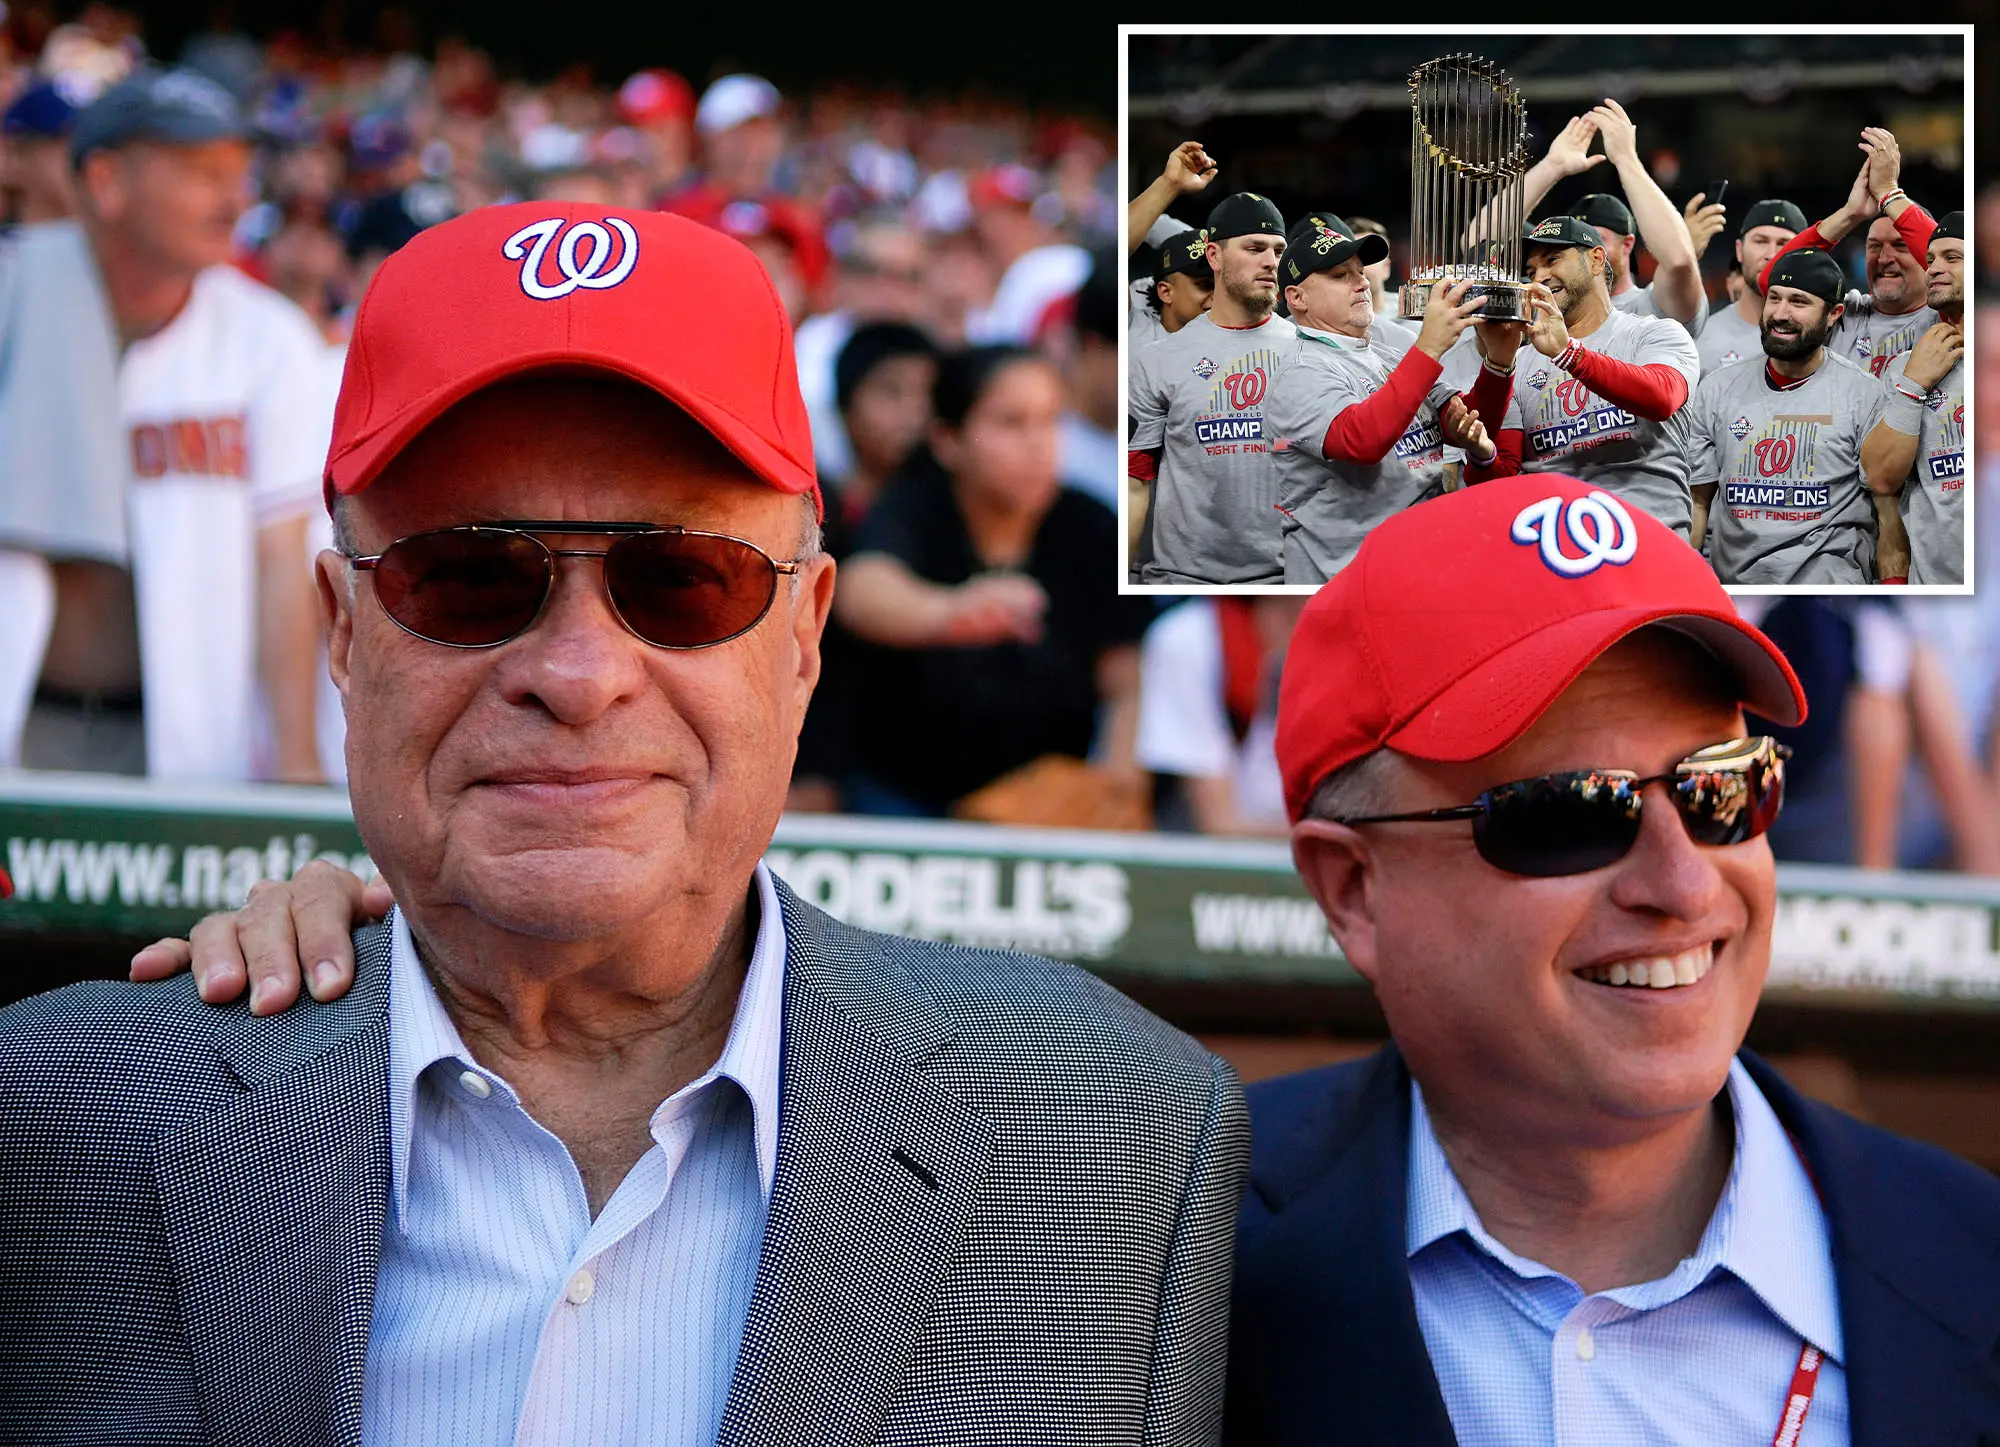 Who Owns the Washington Nationals